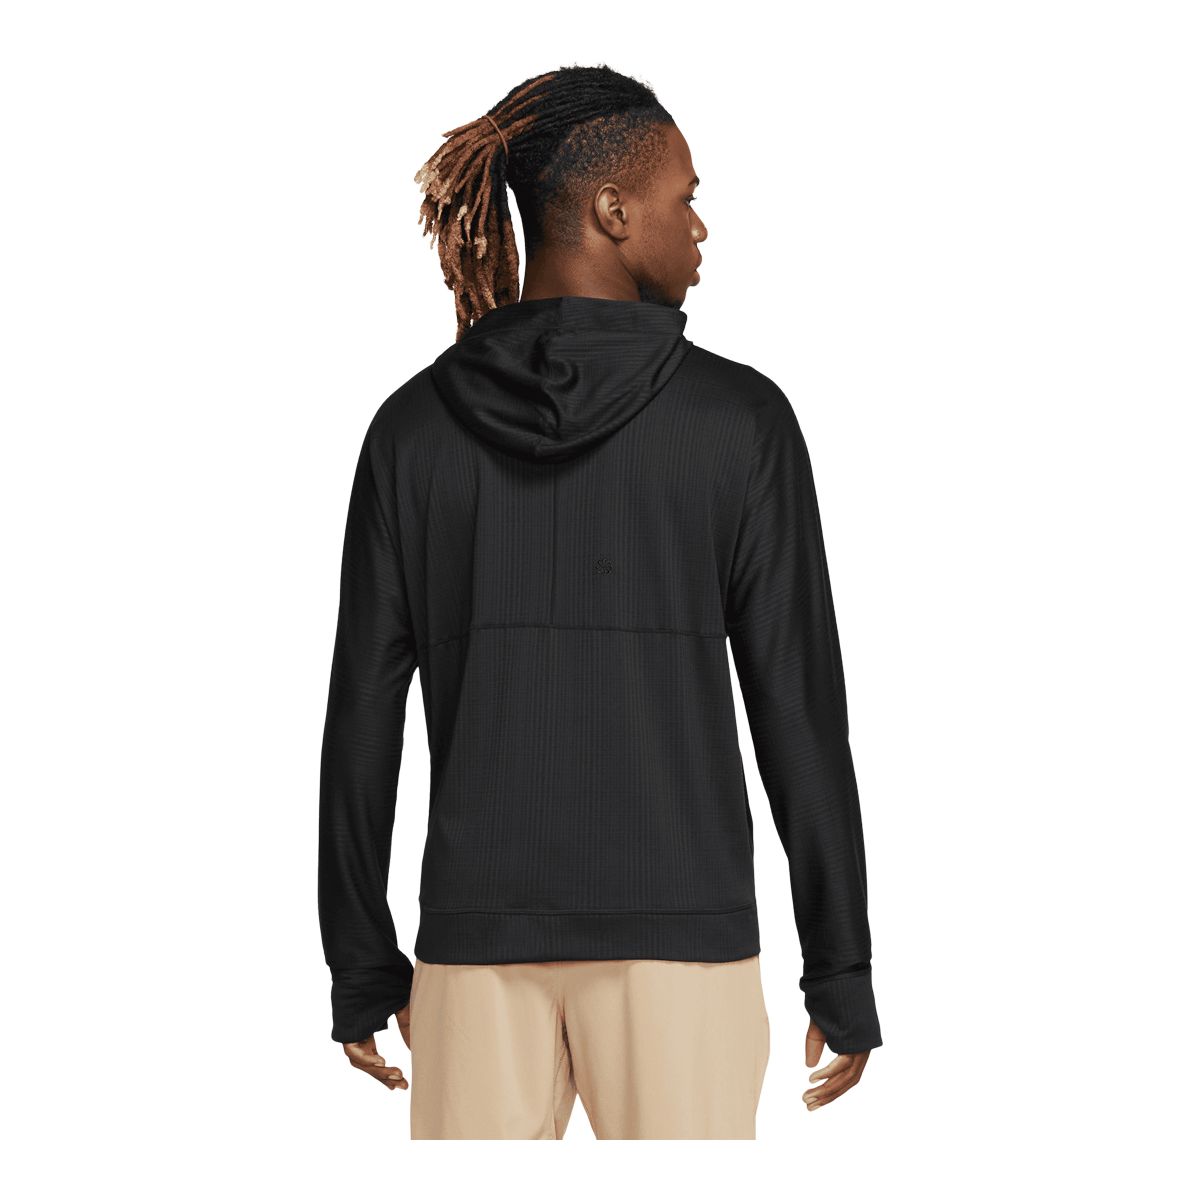 Men's Hooded Tshirts Shirts Lightweight Long Sleeve Novelty Jersey with  Hood Breathable Stretch Athletic Pullover